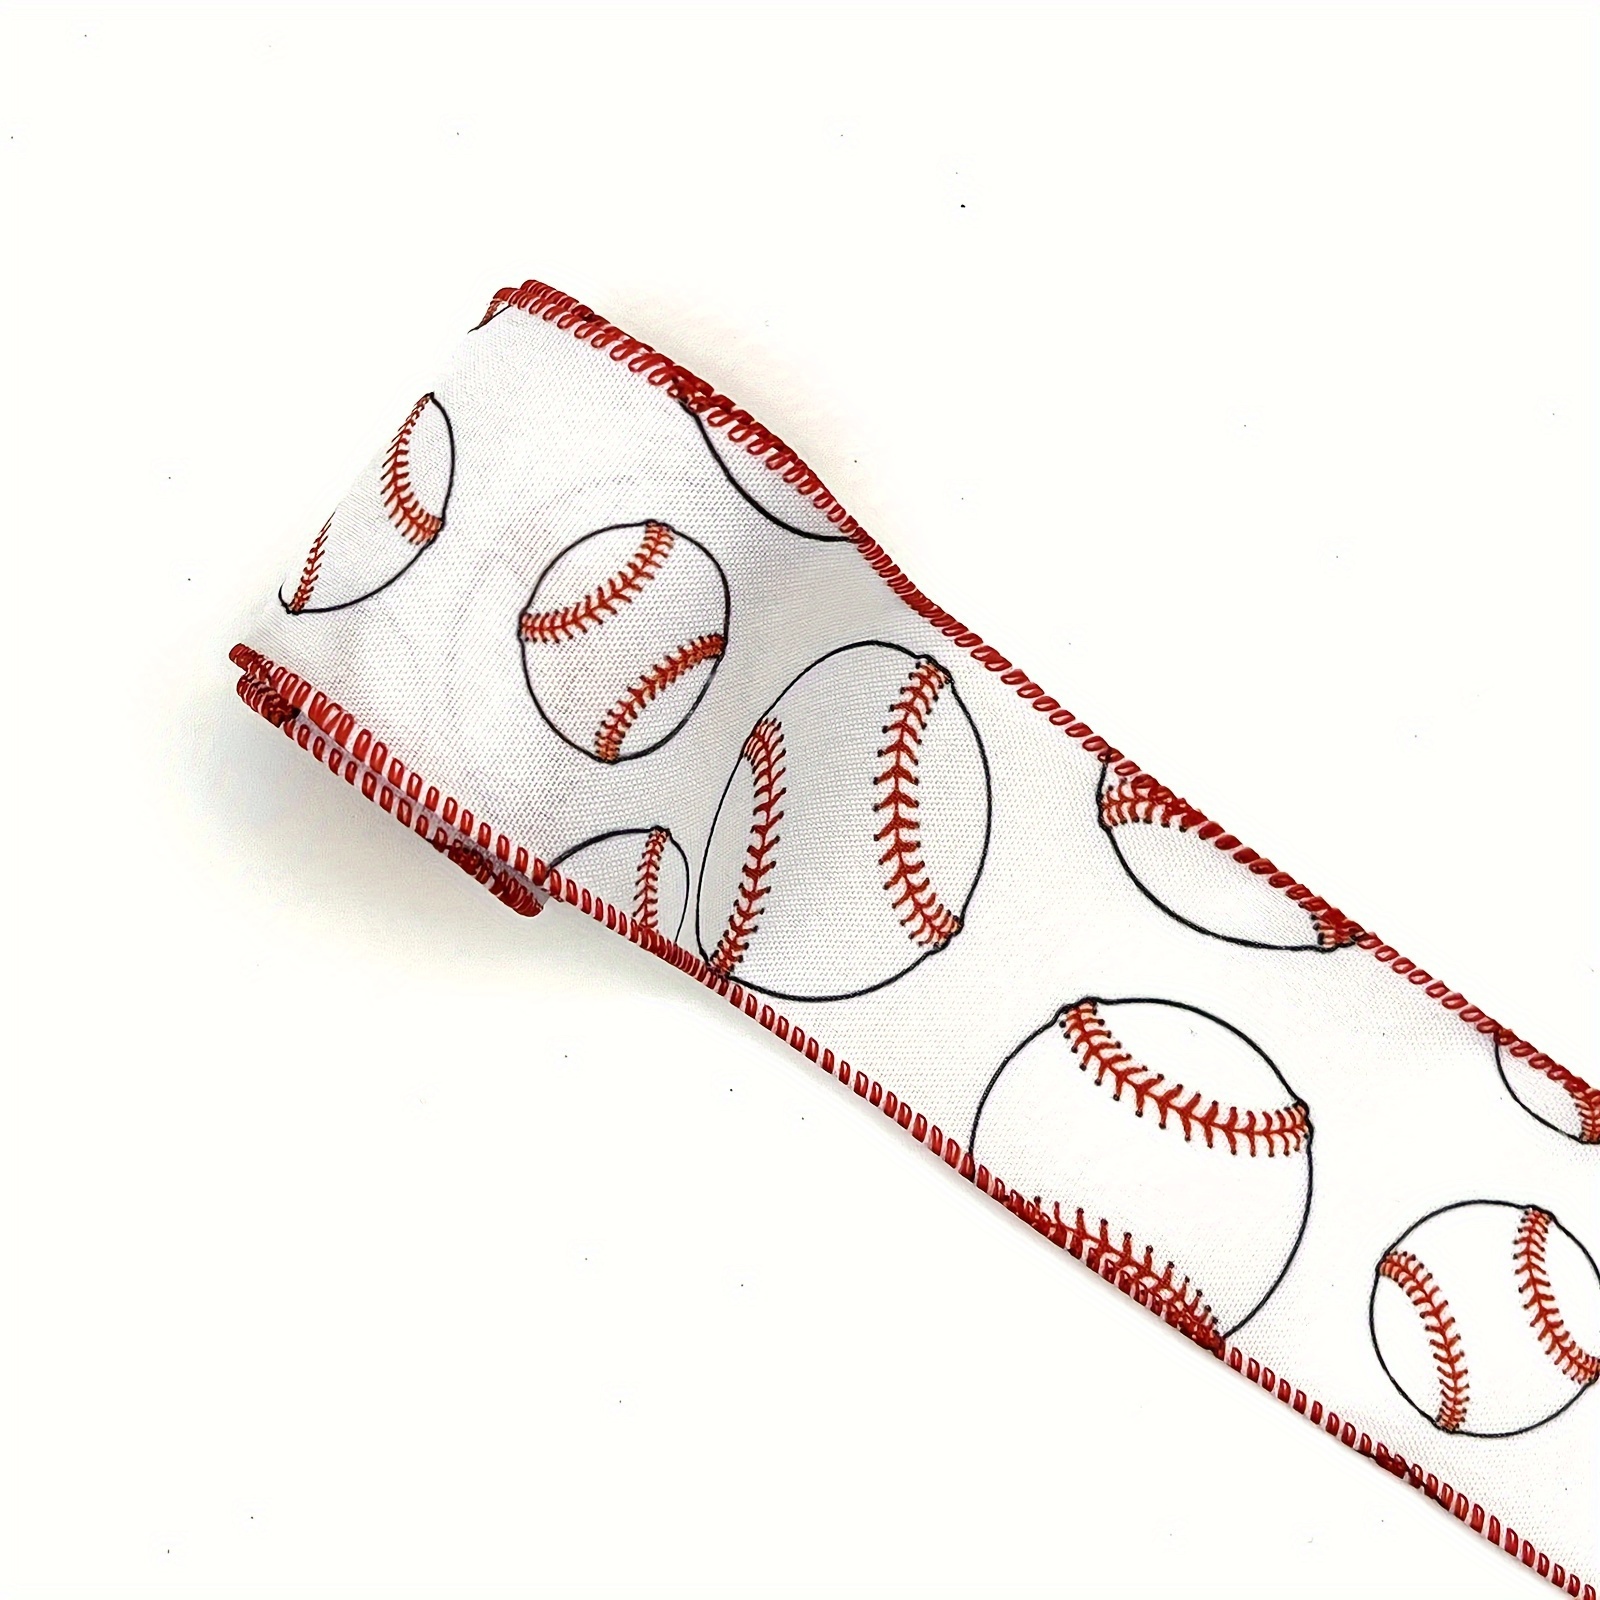 2 Rolls 20 Yards Baseball Ribbons Red White Wired Edge Fabric Ribbons 1.5  Inch Sport Stitching Satin Wired Ribbon for Present Wrapping DIY Crafts